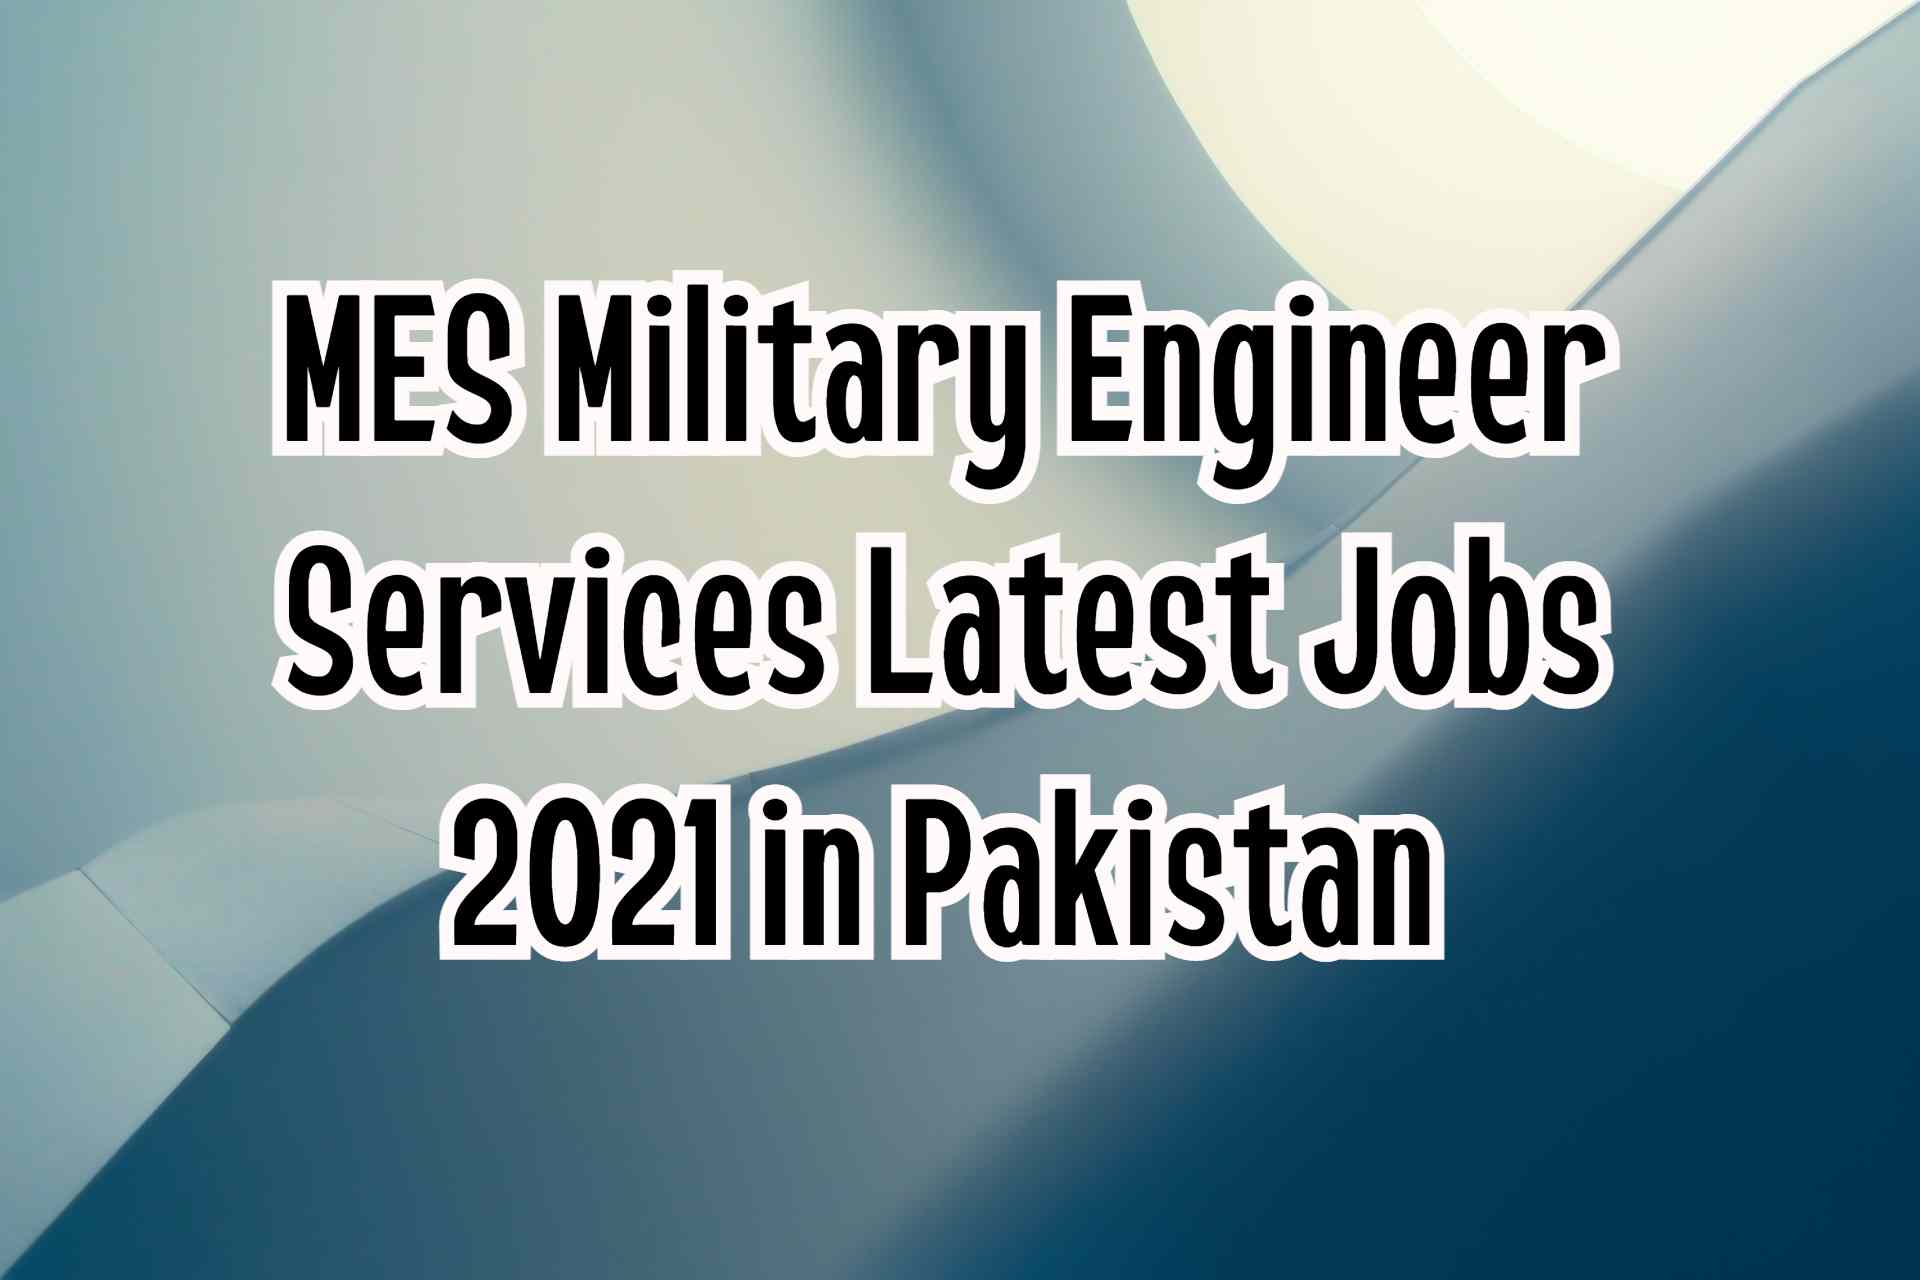 MES Military Engineer Services Latest Jobs 2021 in Pakistan